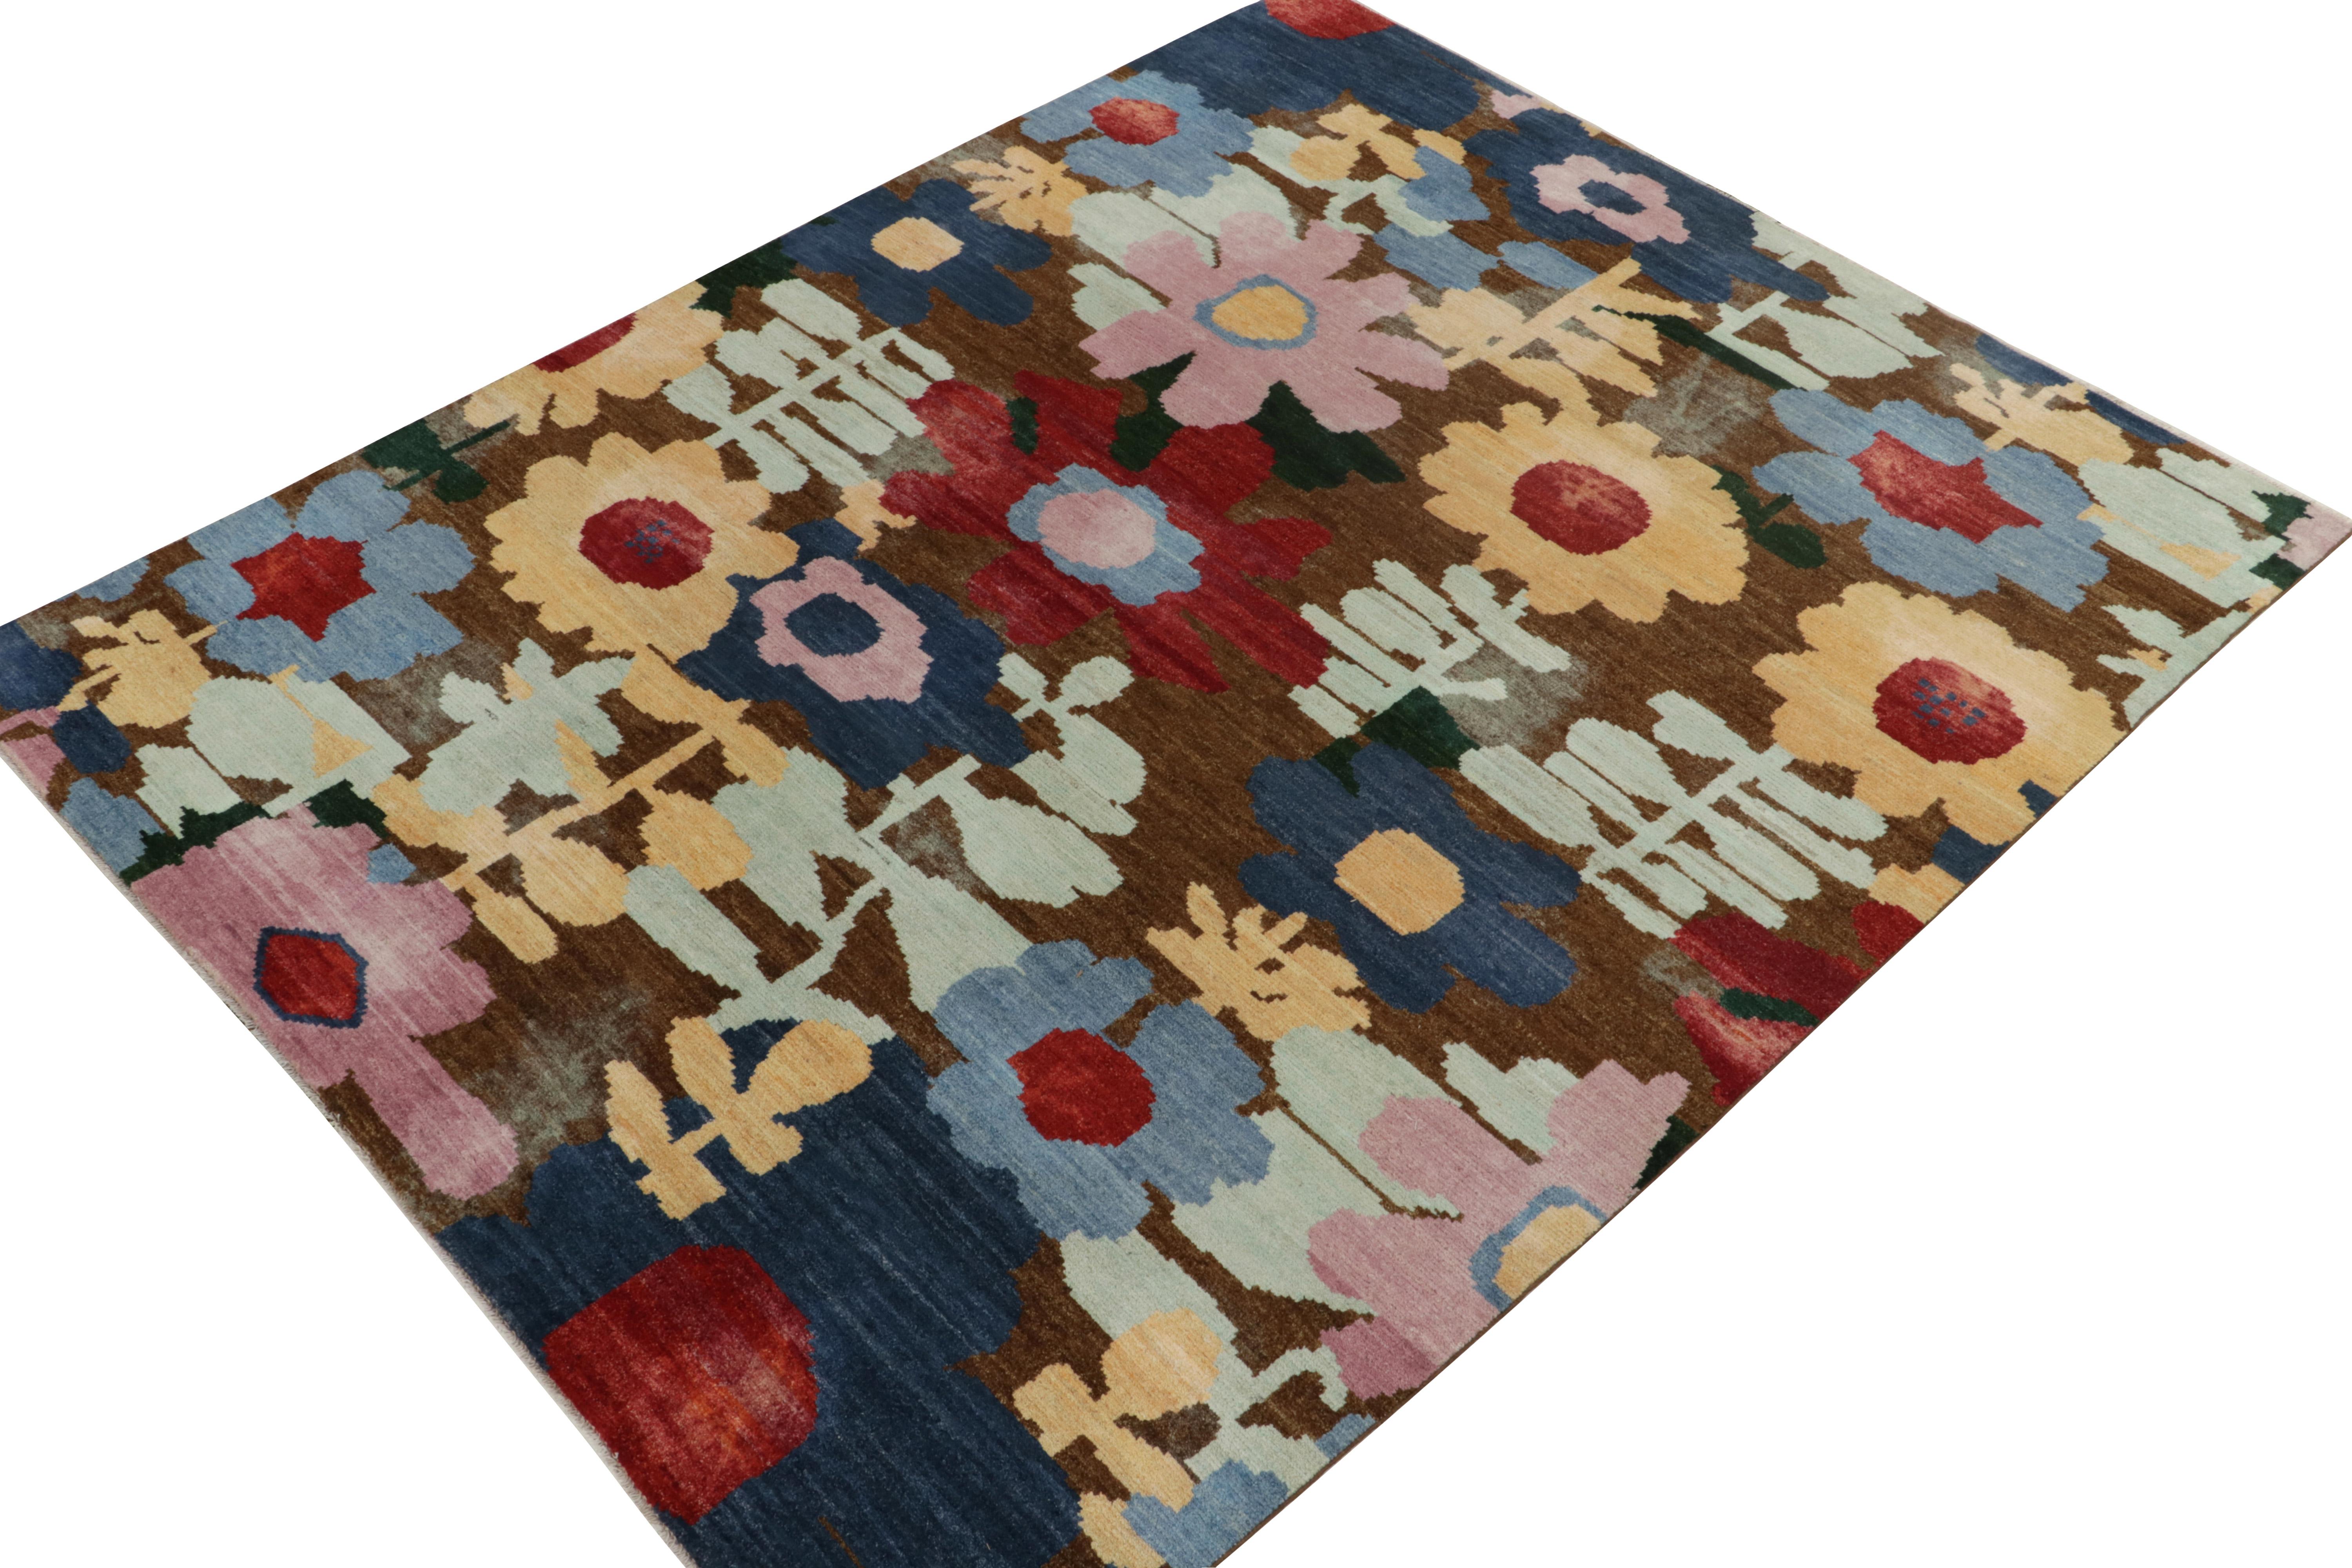 Hand knotted in wool, an 8x10 rug from the latest unveilings of Rug & Kilim’s New & Modern Collection. 

On the Design: This refreshing piece enjoys multicolor florals for a playful take on botanical designs. The beautiful play of rich brown with